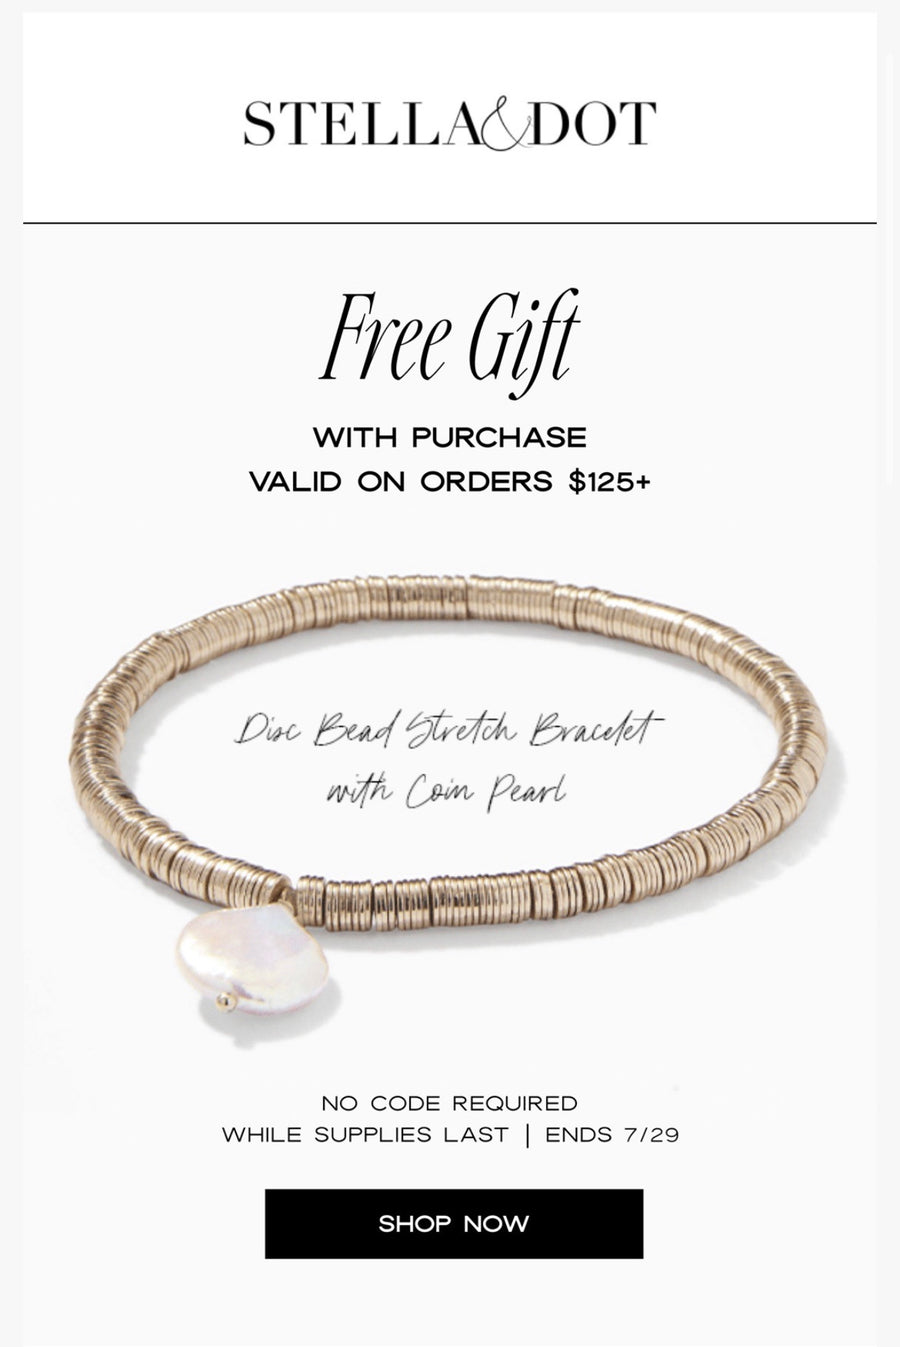 Today Through 7/29: Enjoy a free gift with purchase!